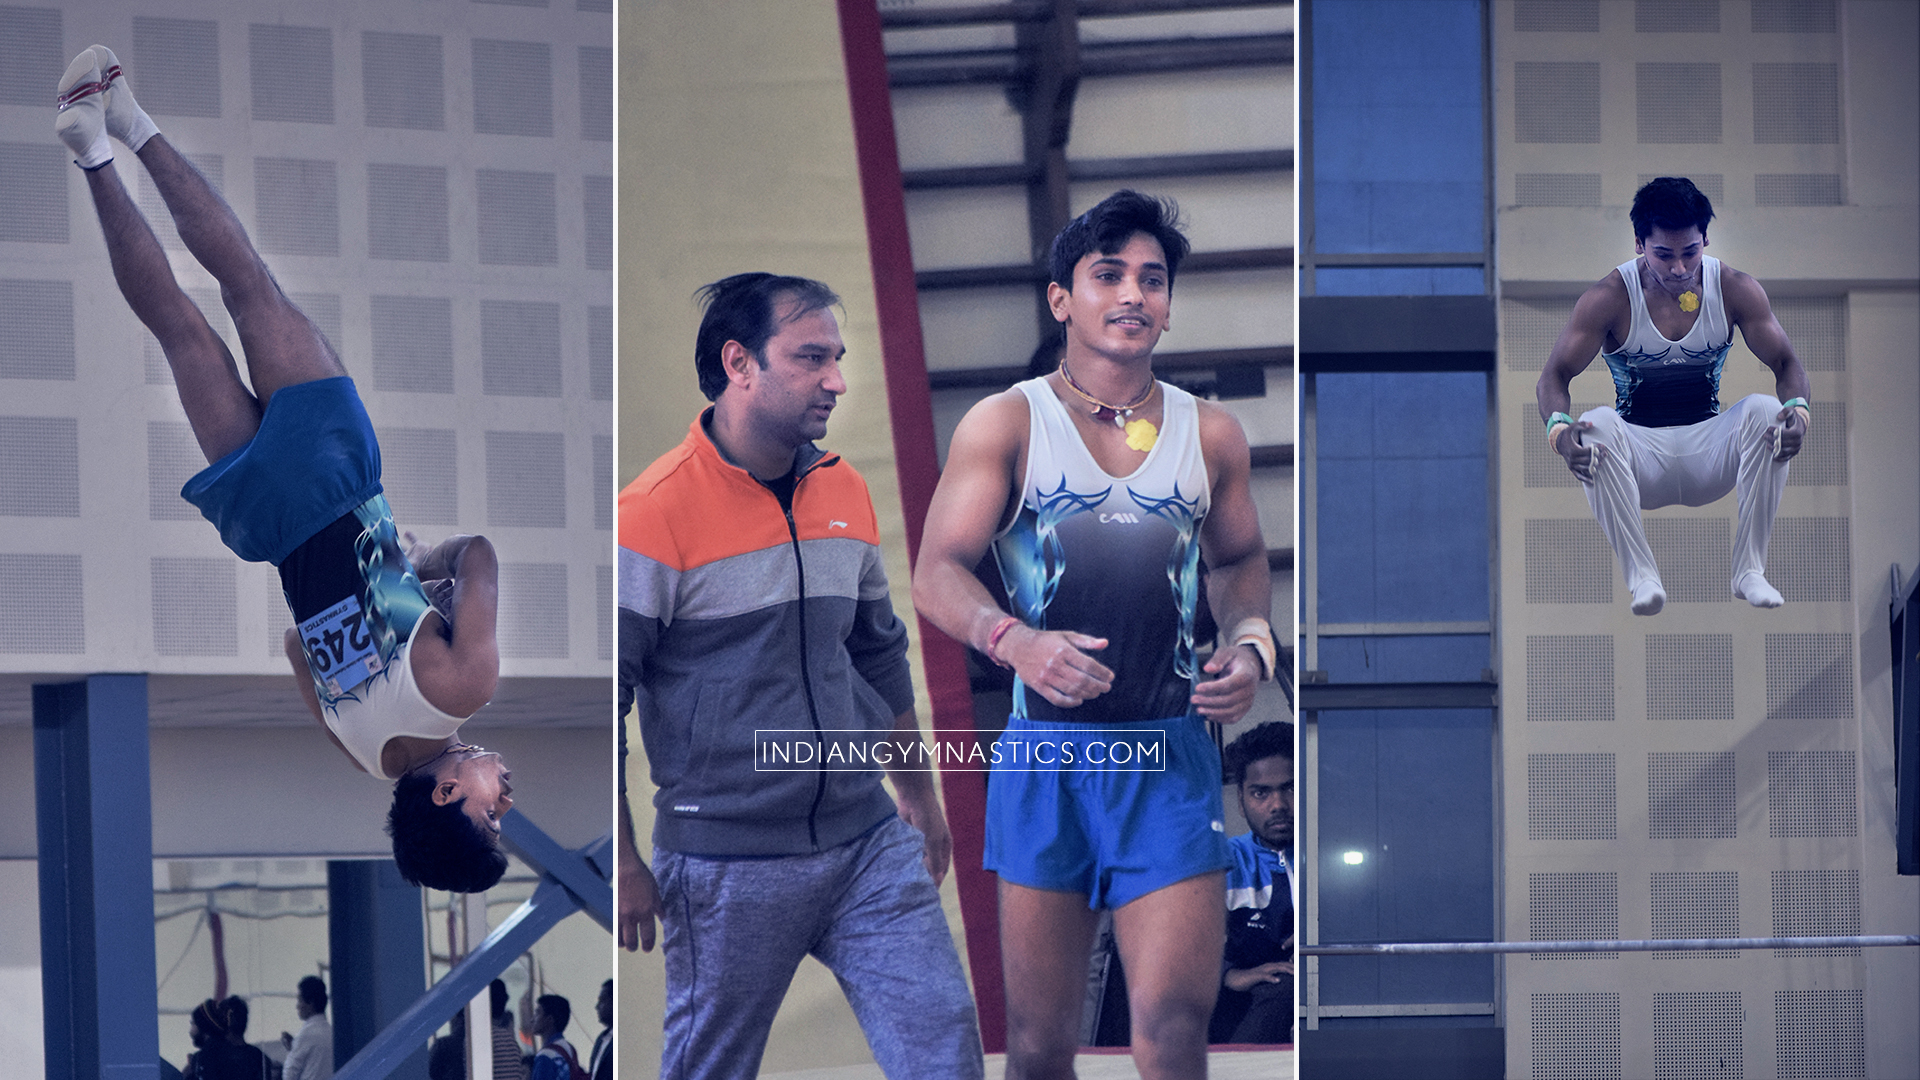 The very first target is to do my best at CWG, and reach the finals. – Ashish Kumar